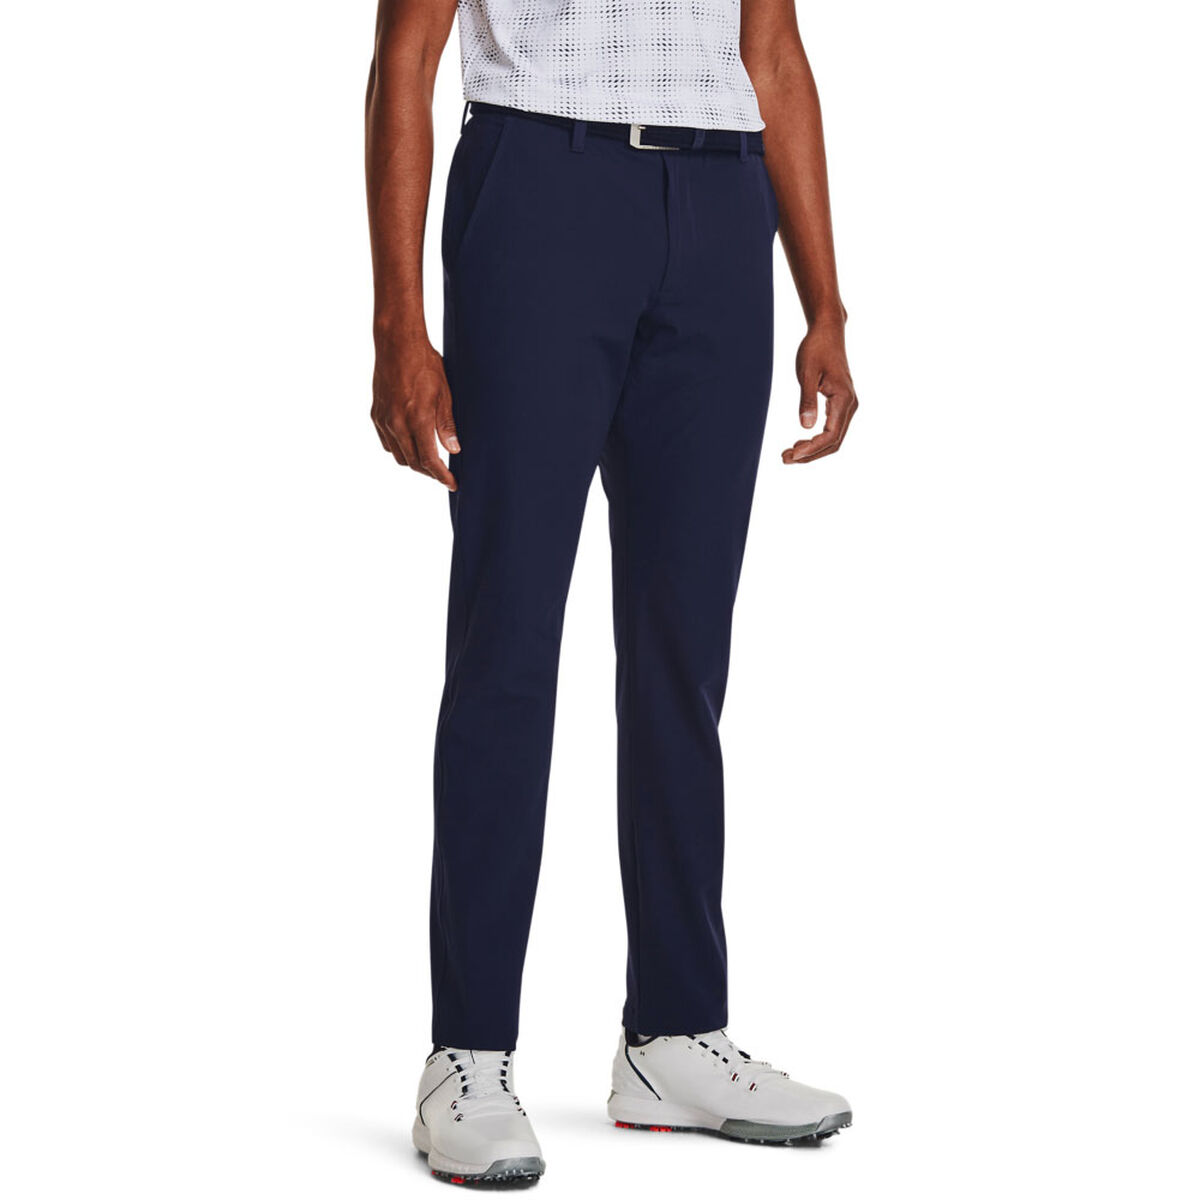 Under Armour Men’s Navy Blue and Grey Knitted Drive Tapered Regular Fit Golf Trousers, Size: 34 | American Golf